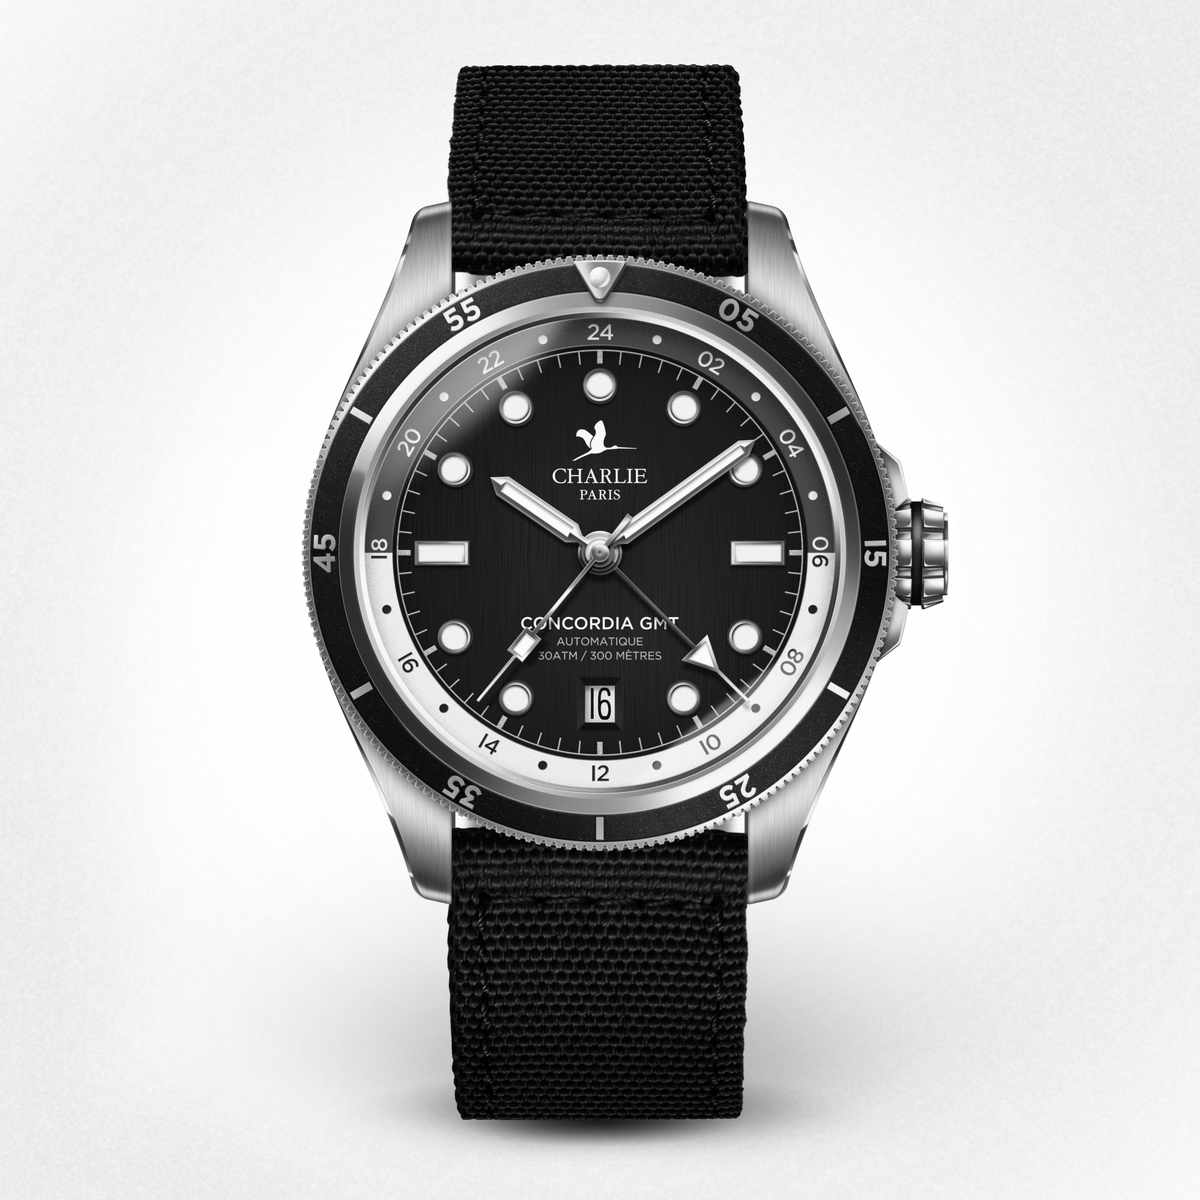 Black Waterproof GMT Watch with Swiss Movement - Concordia Automatic GMT Black